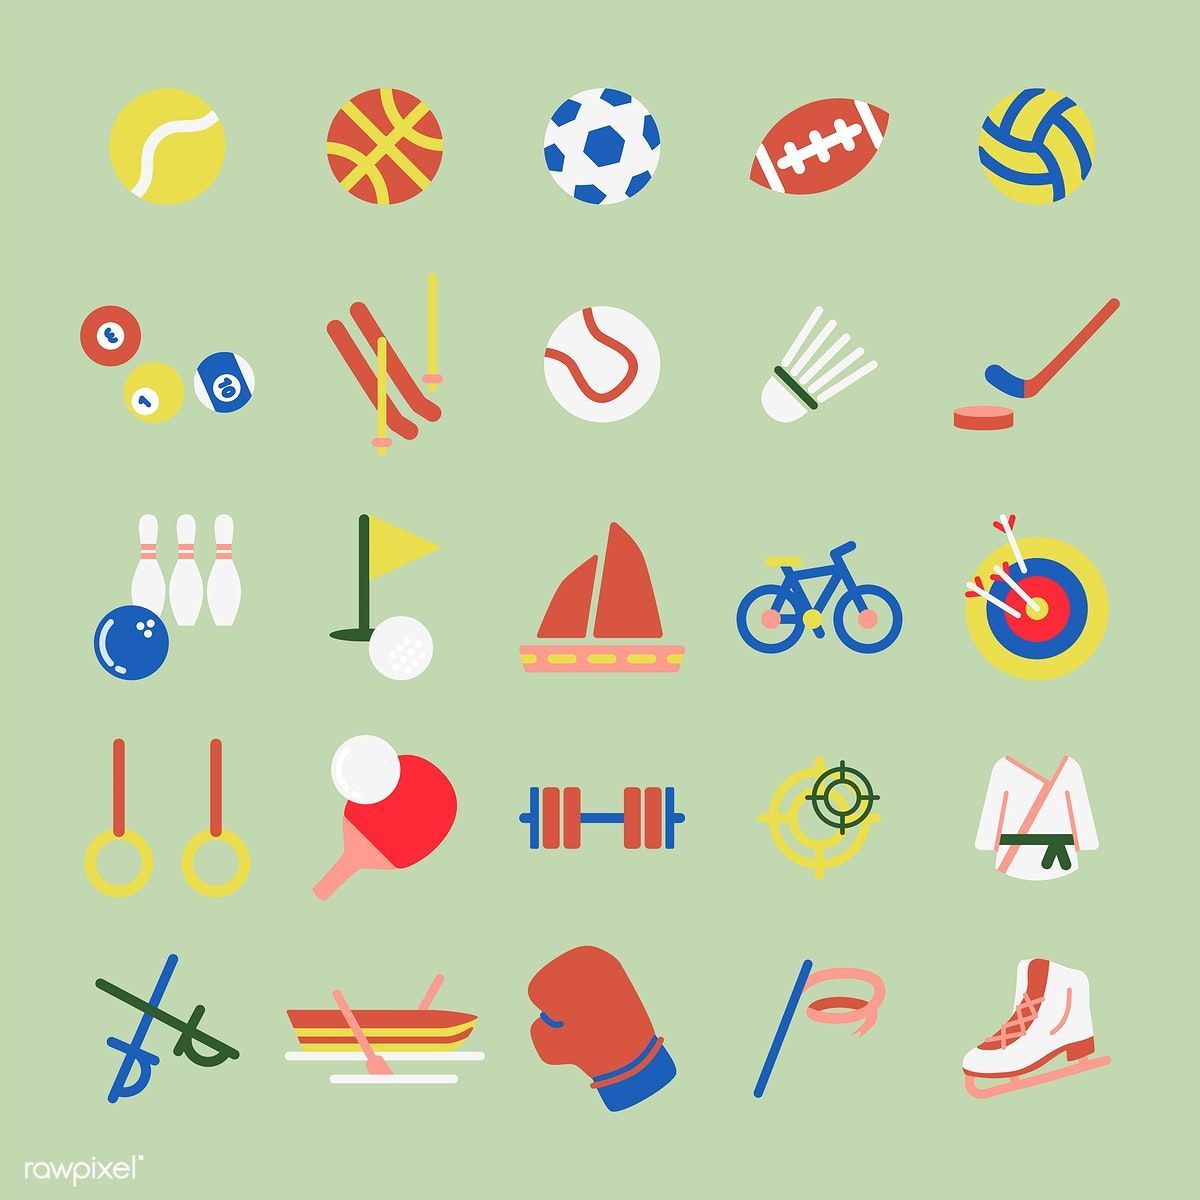 Illustration set of hobbies and sports iconsa. Free vector art